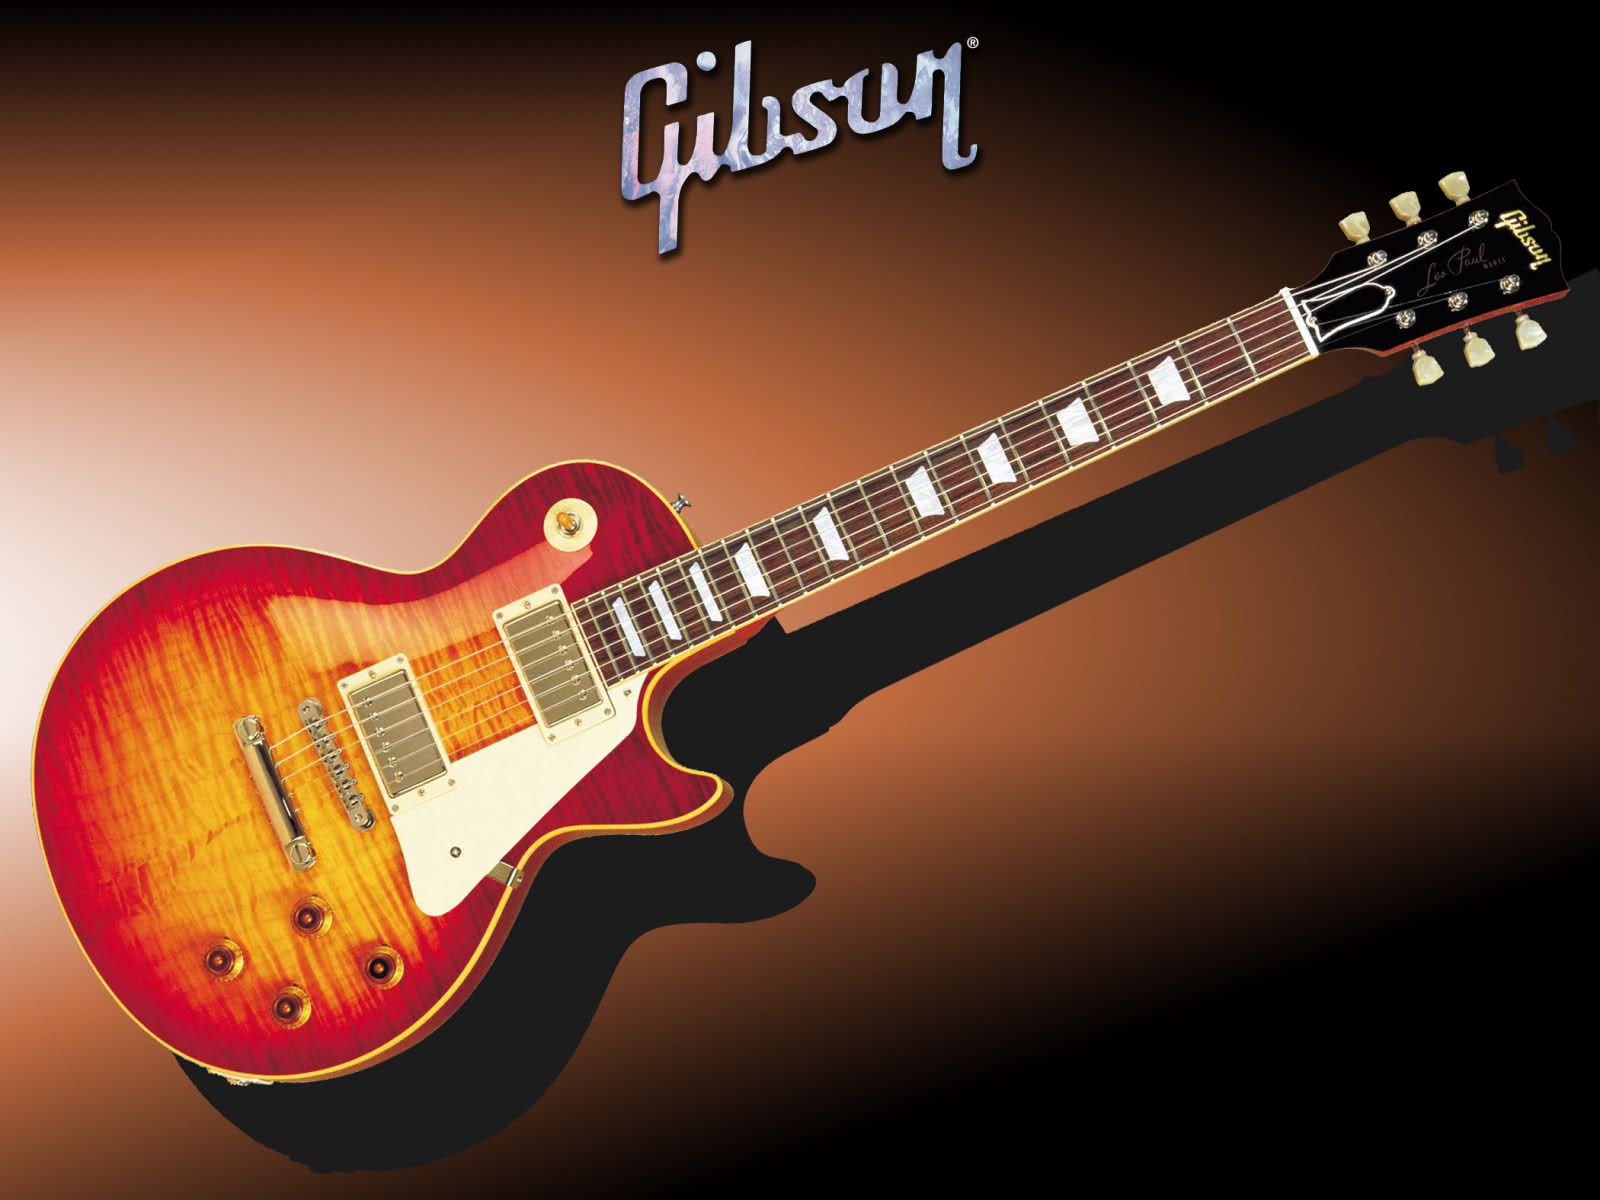 A guitar with the word gibson on it - Guitar